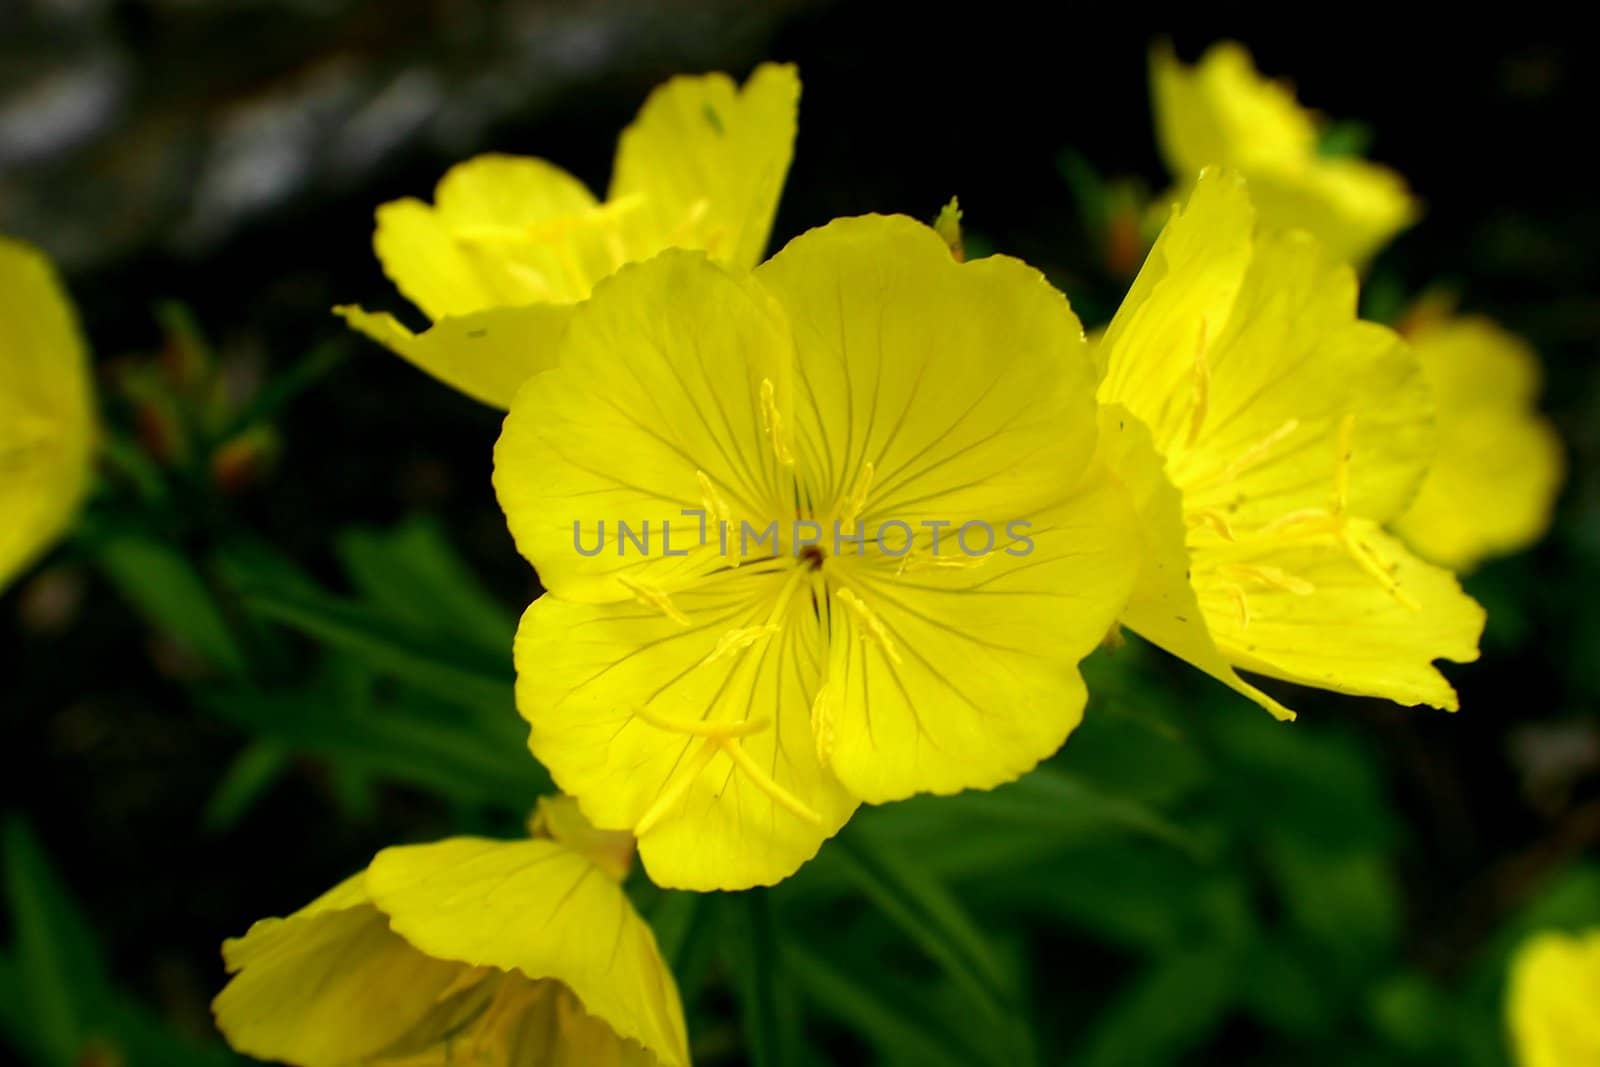 Bright yellow buttercup flowers on green background